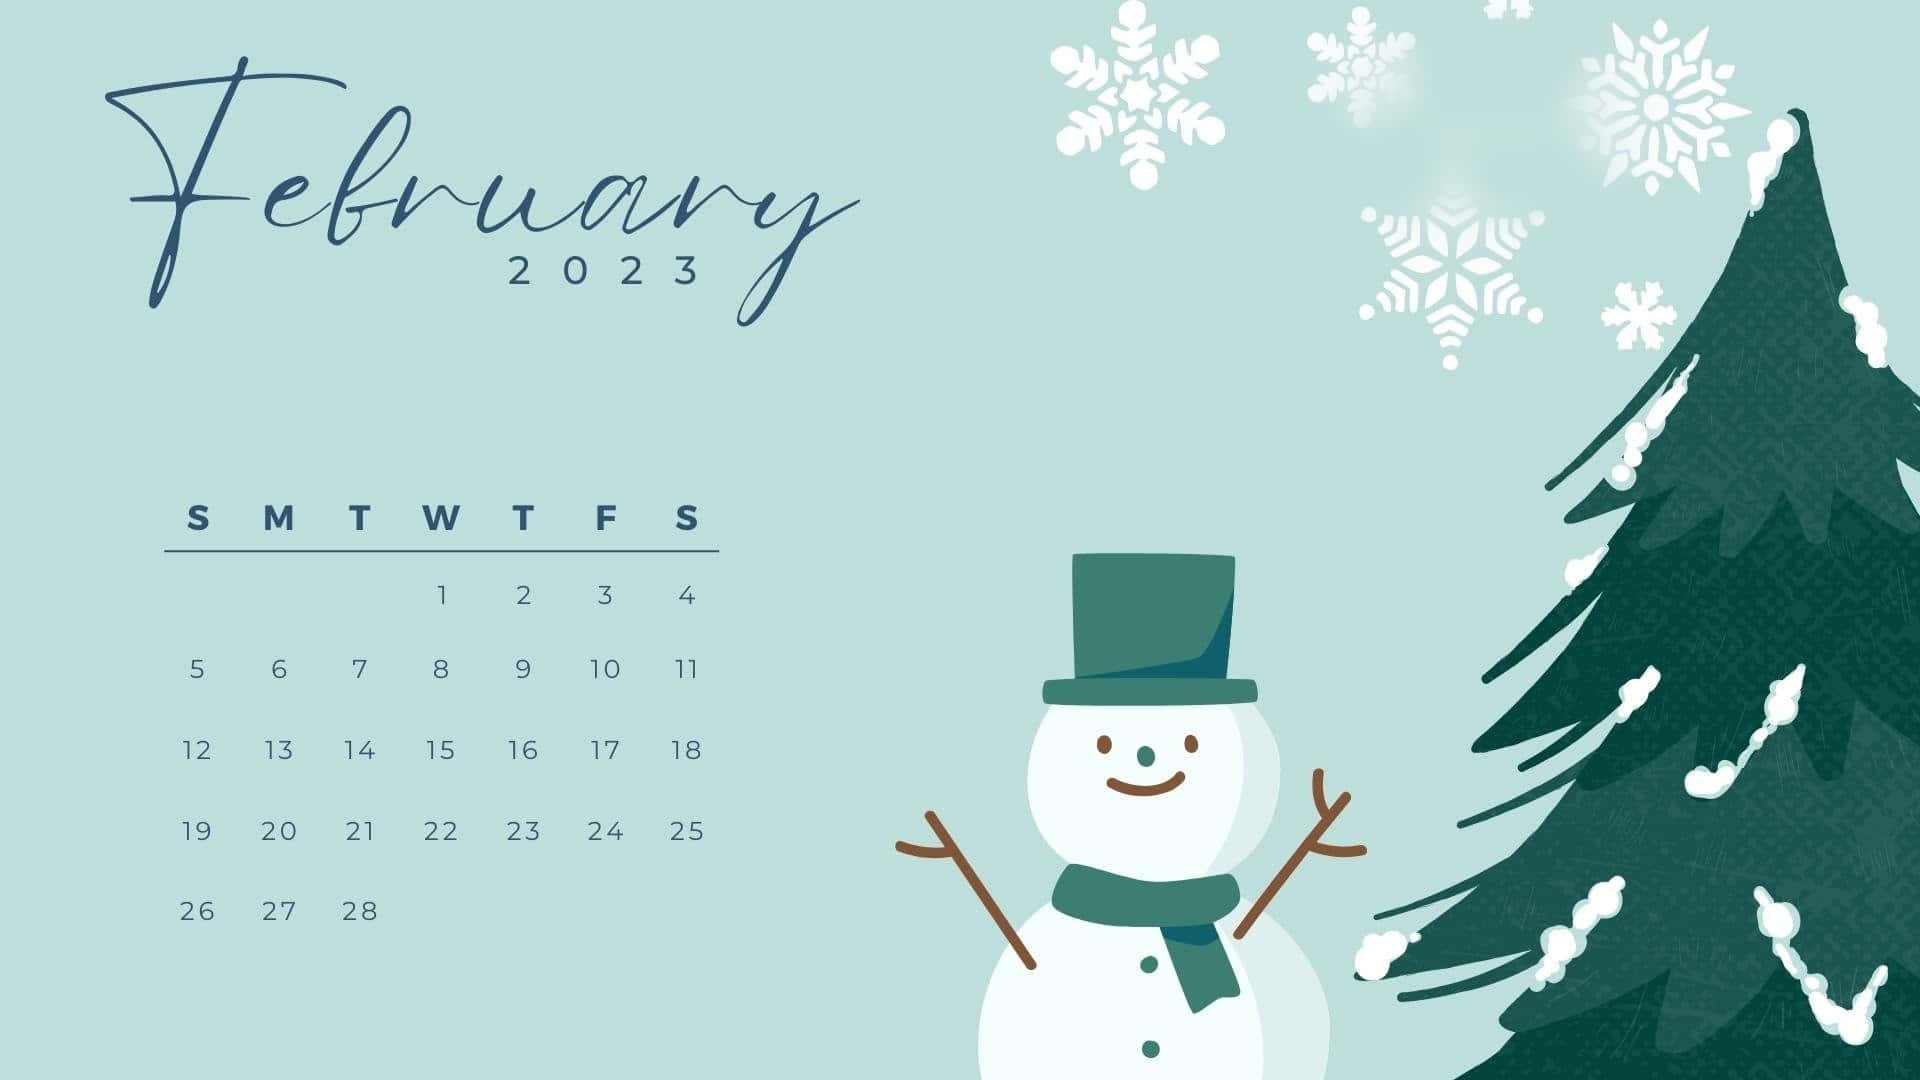 Plan Your February with this Calendar Wallpaper